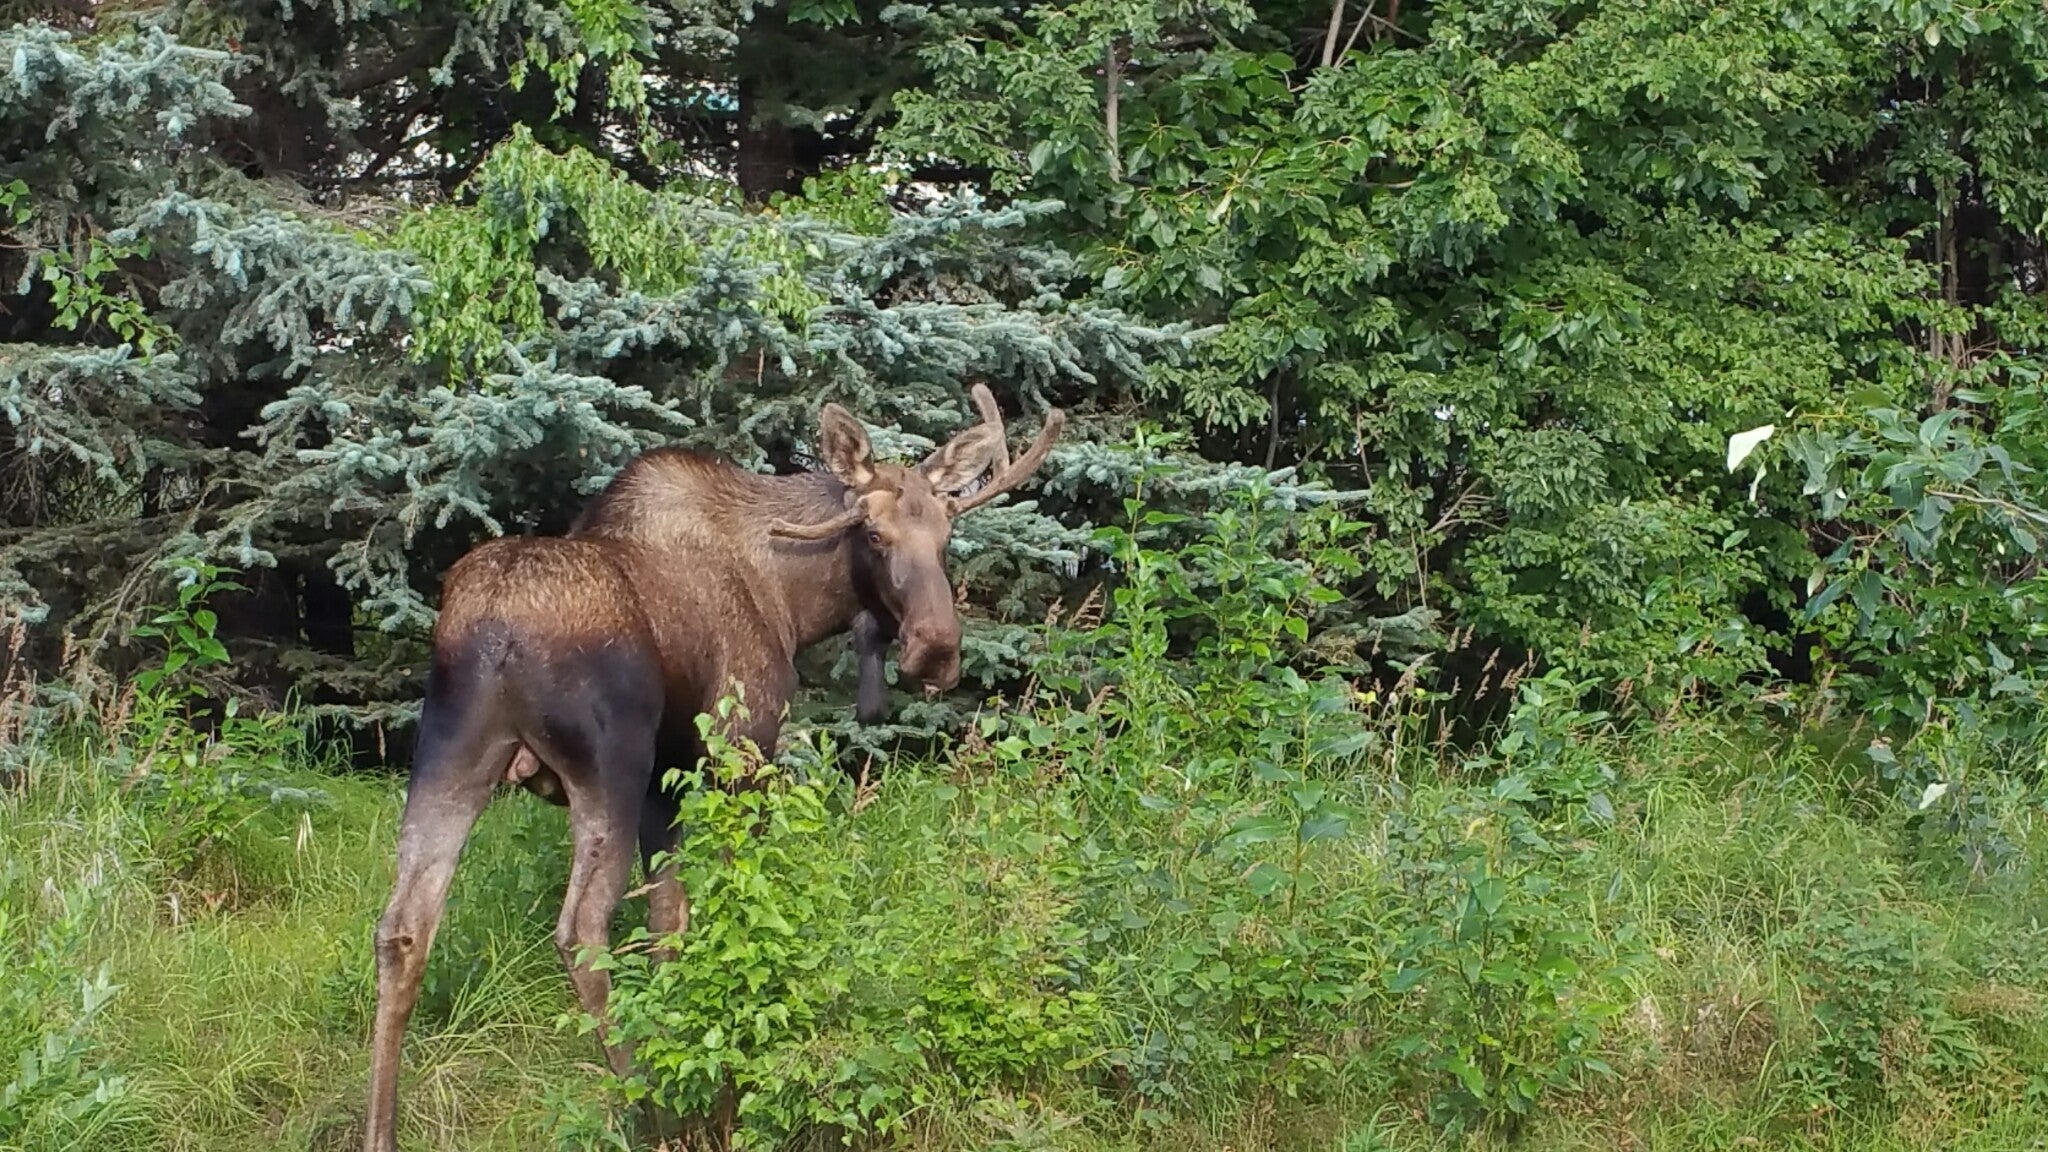 Hello! Moose are more dangerous than the bears so don't be riding or getting too close!